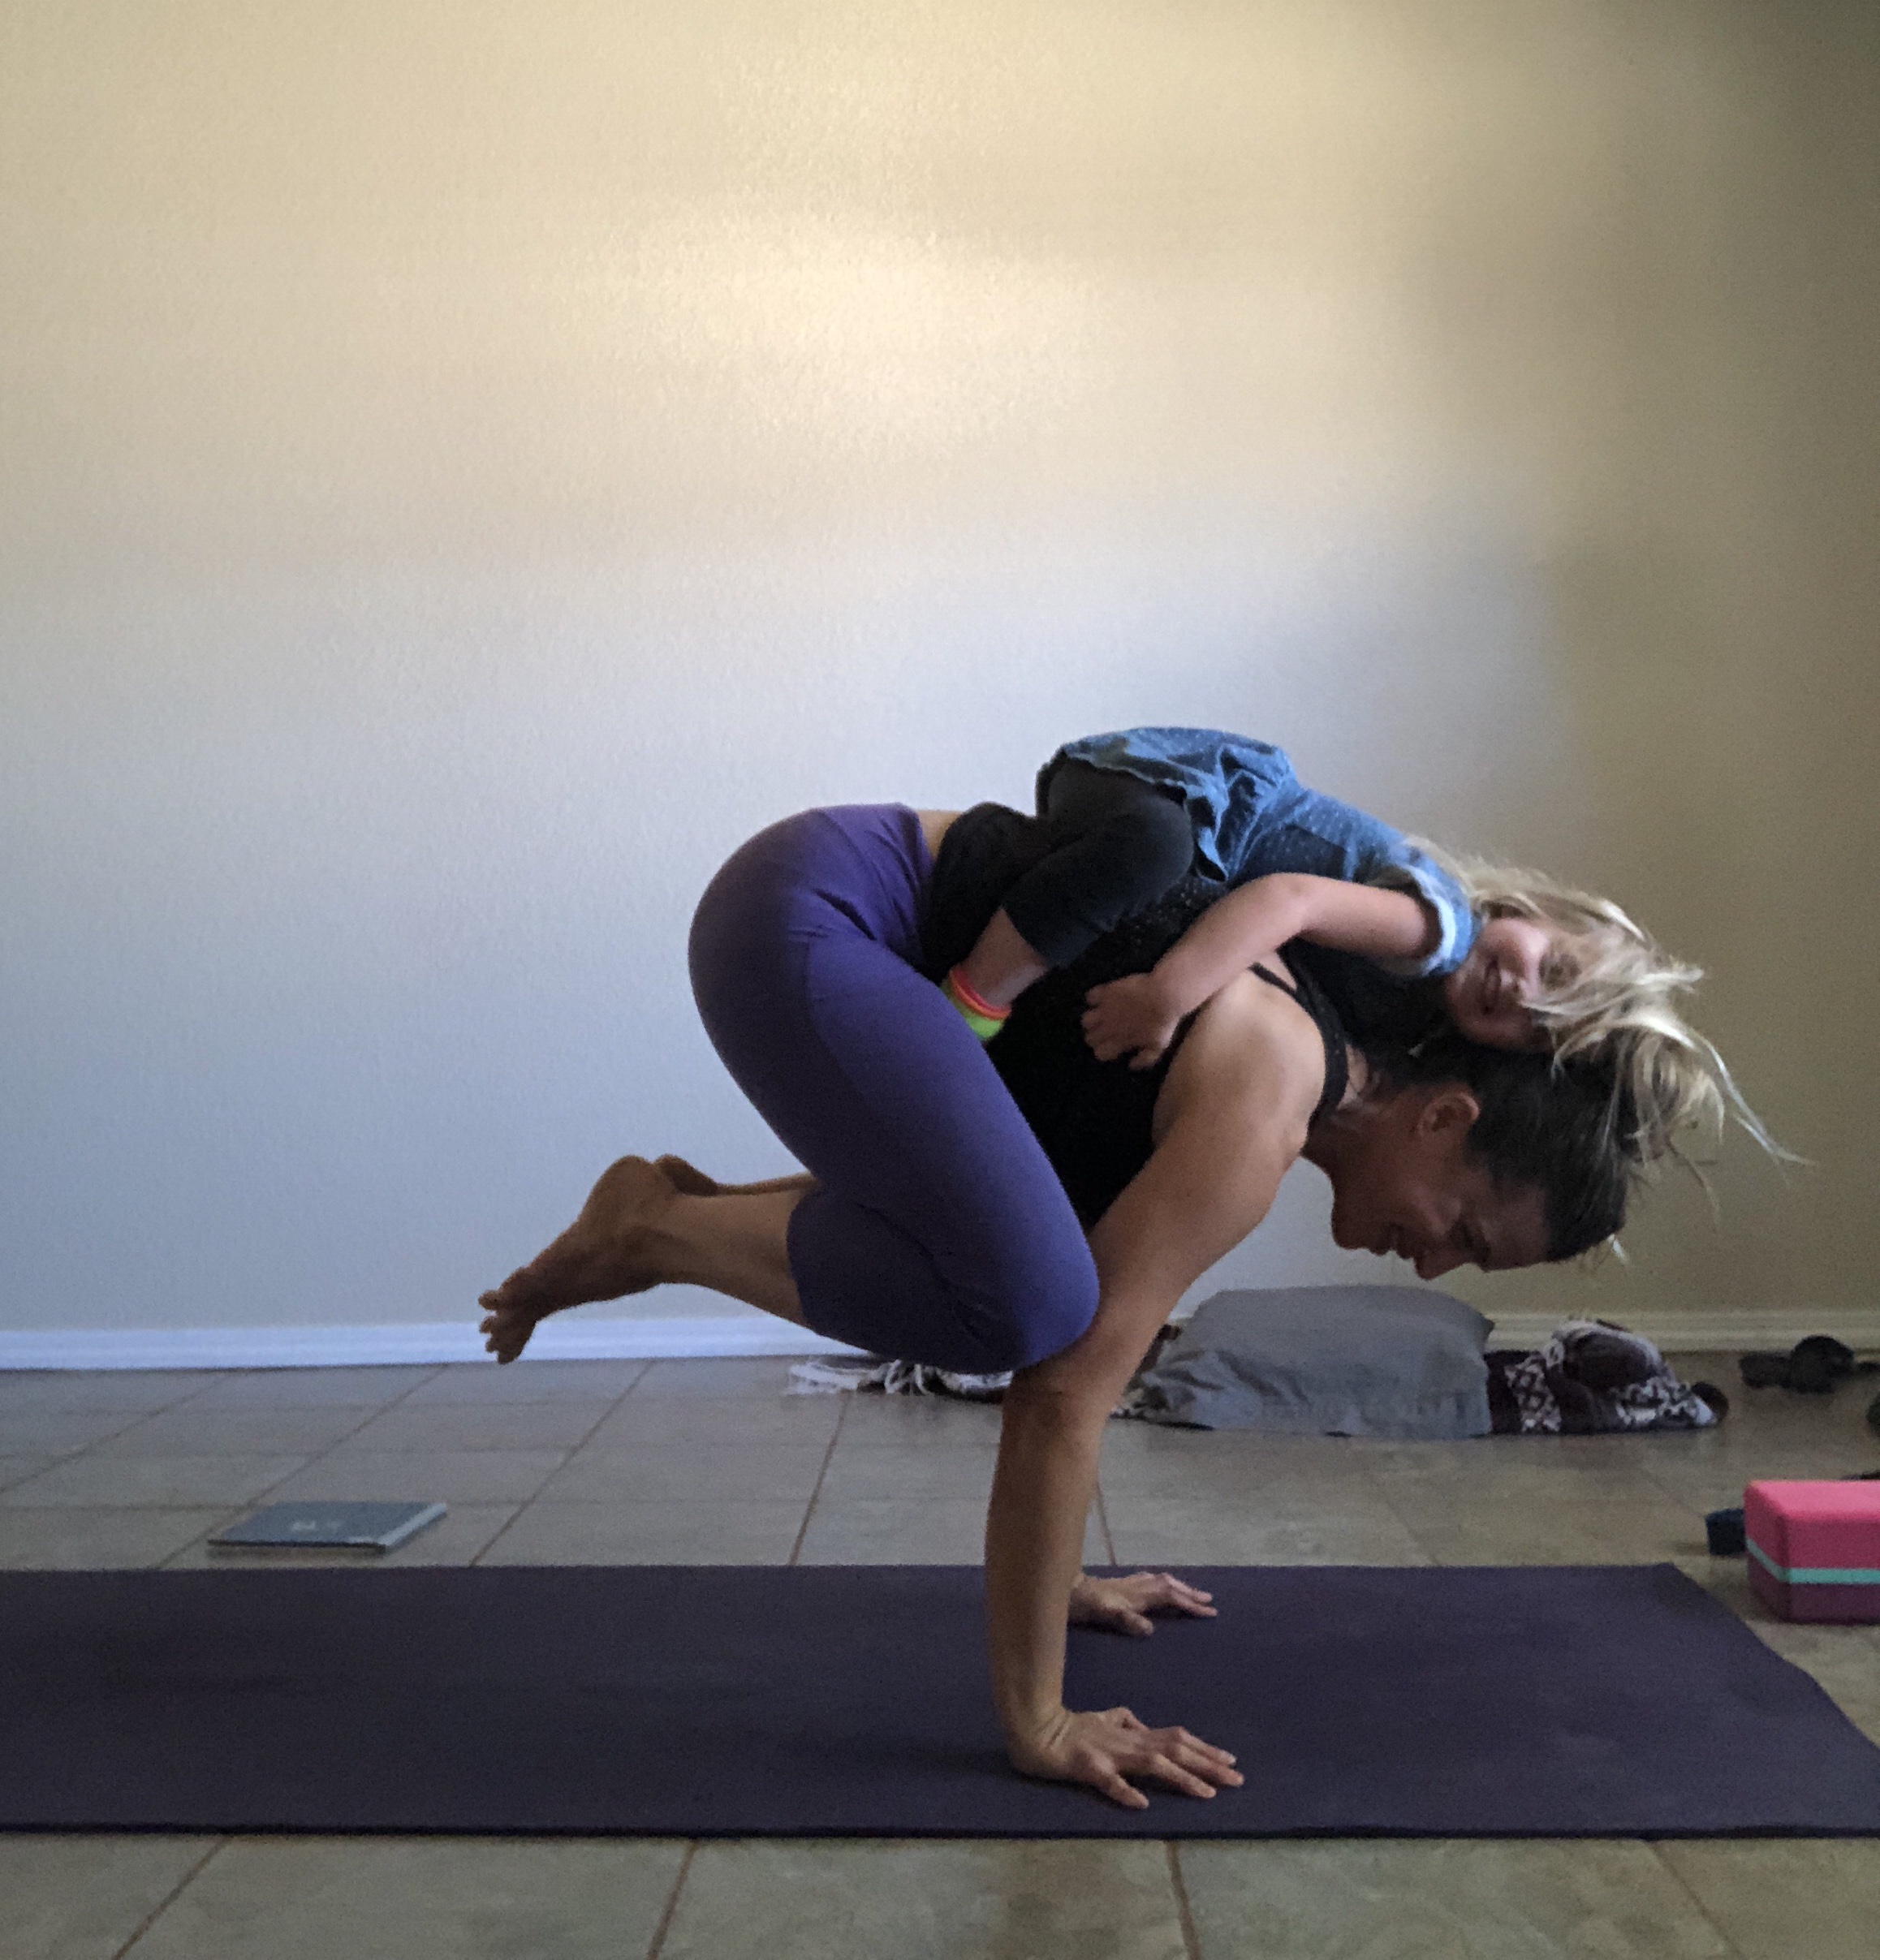 How to Get Better at Arm Balances